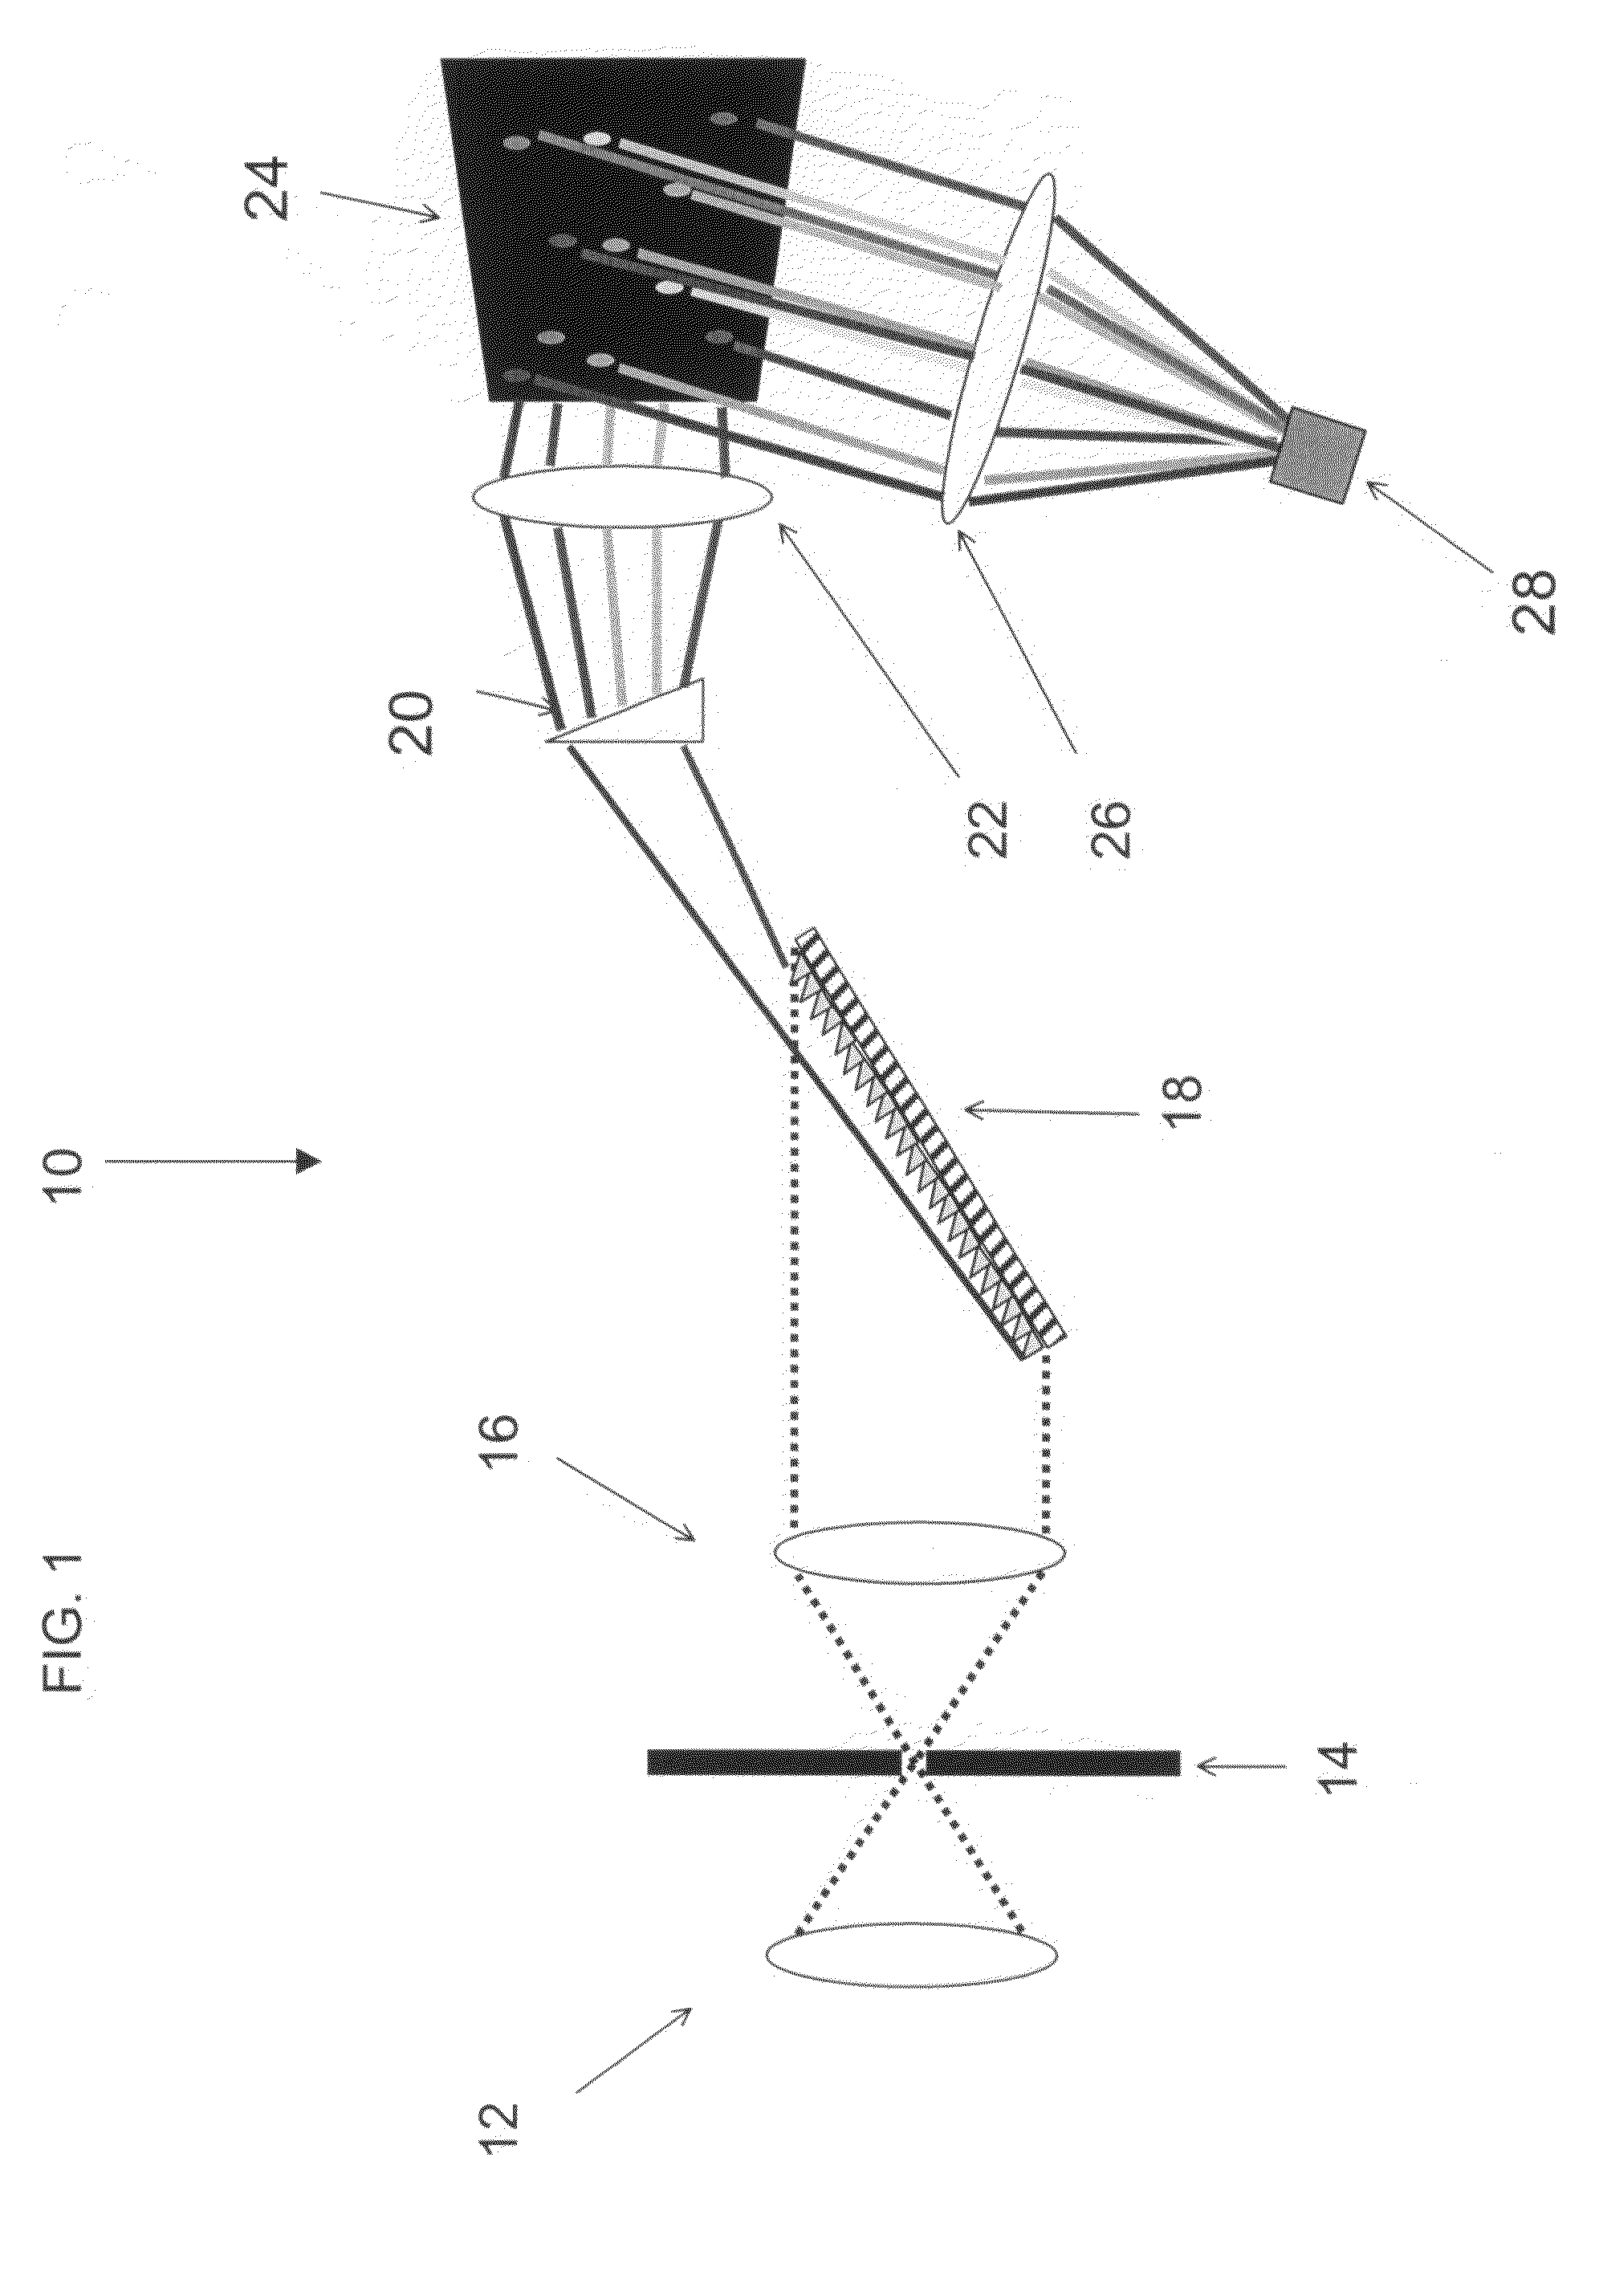 Spectrometers using 2-dimensional microelectromechanical digital micromirror devices